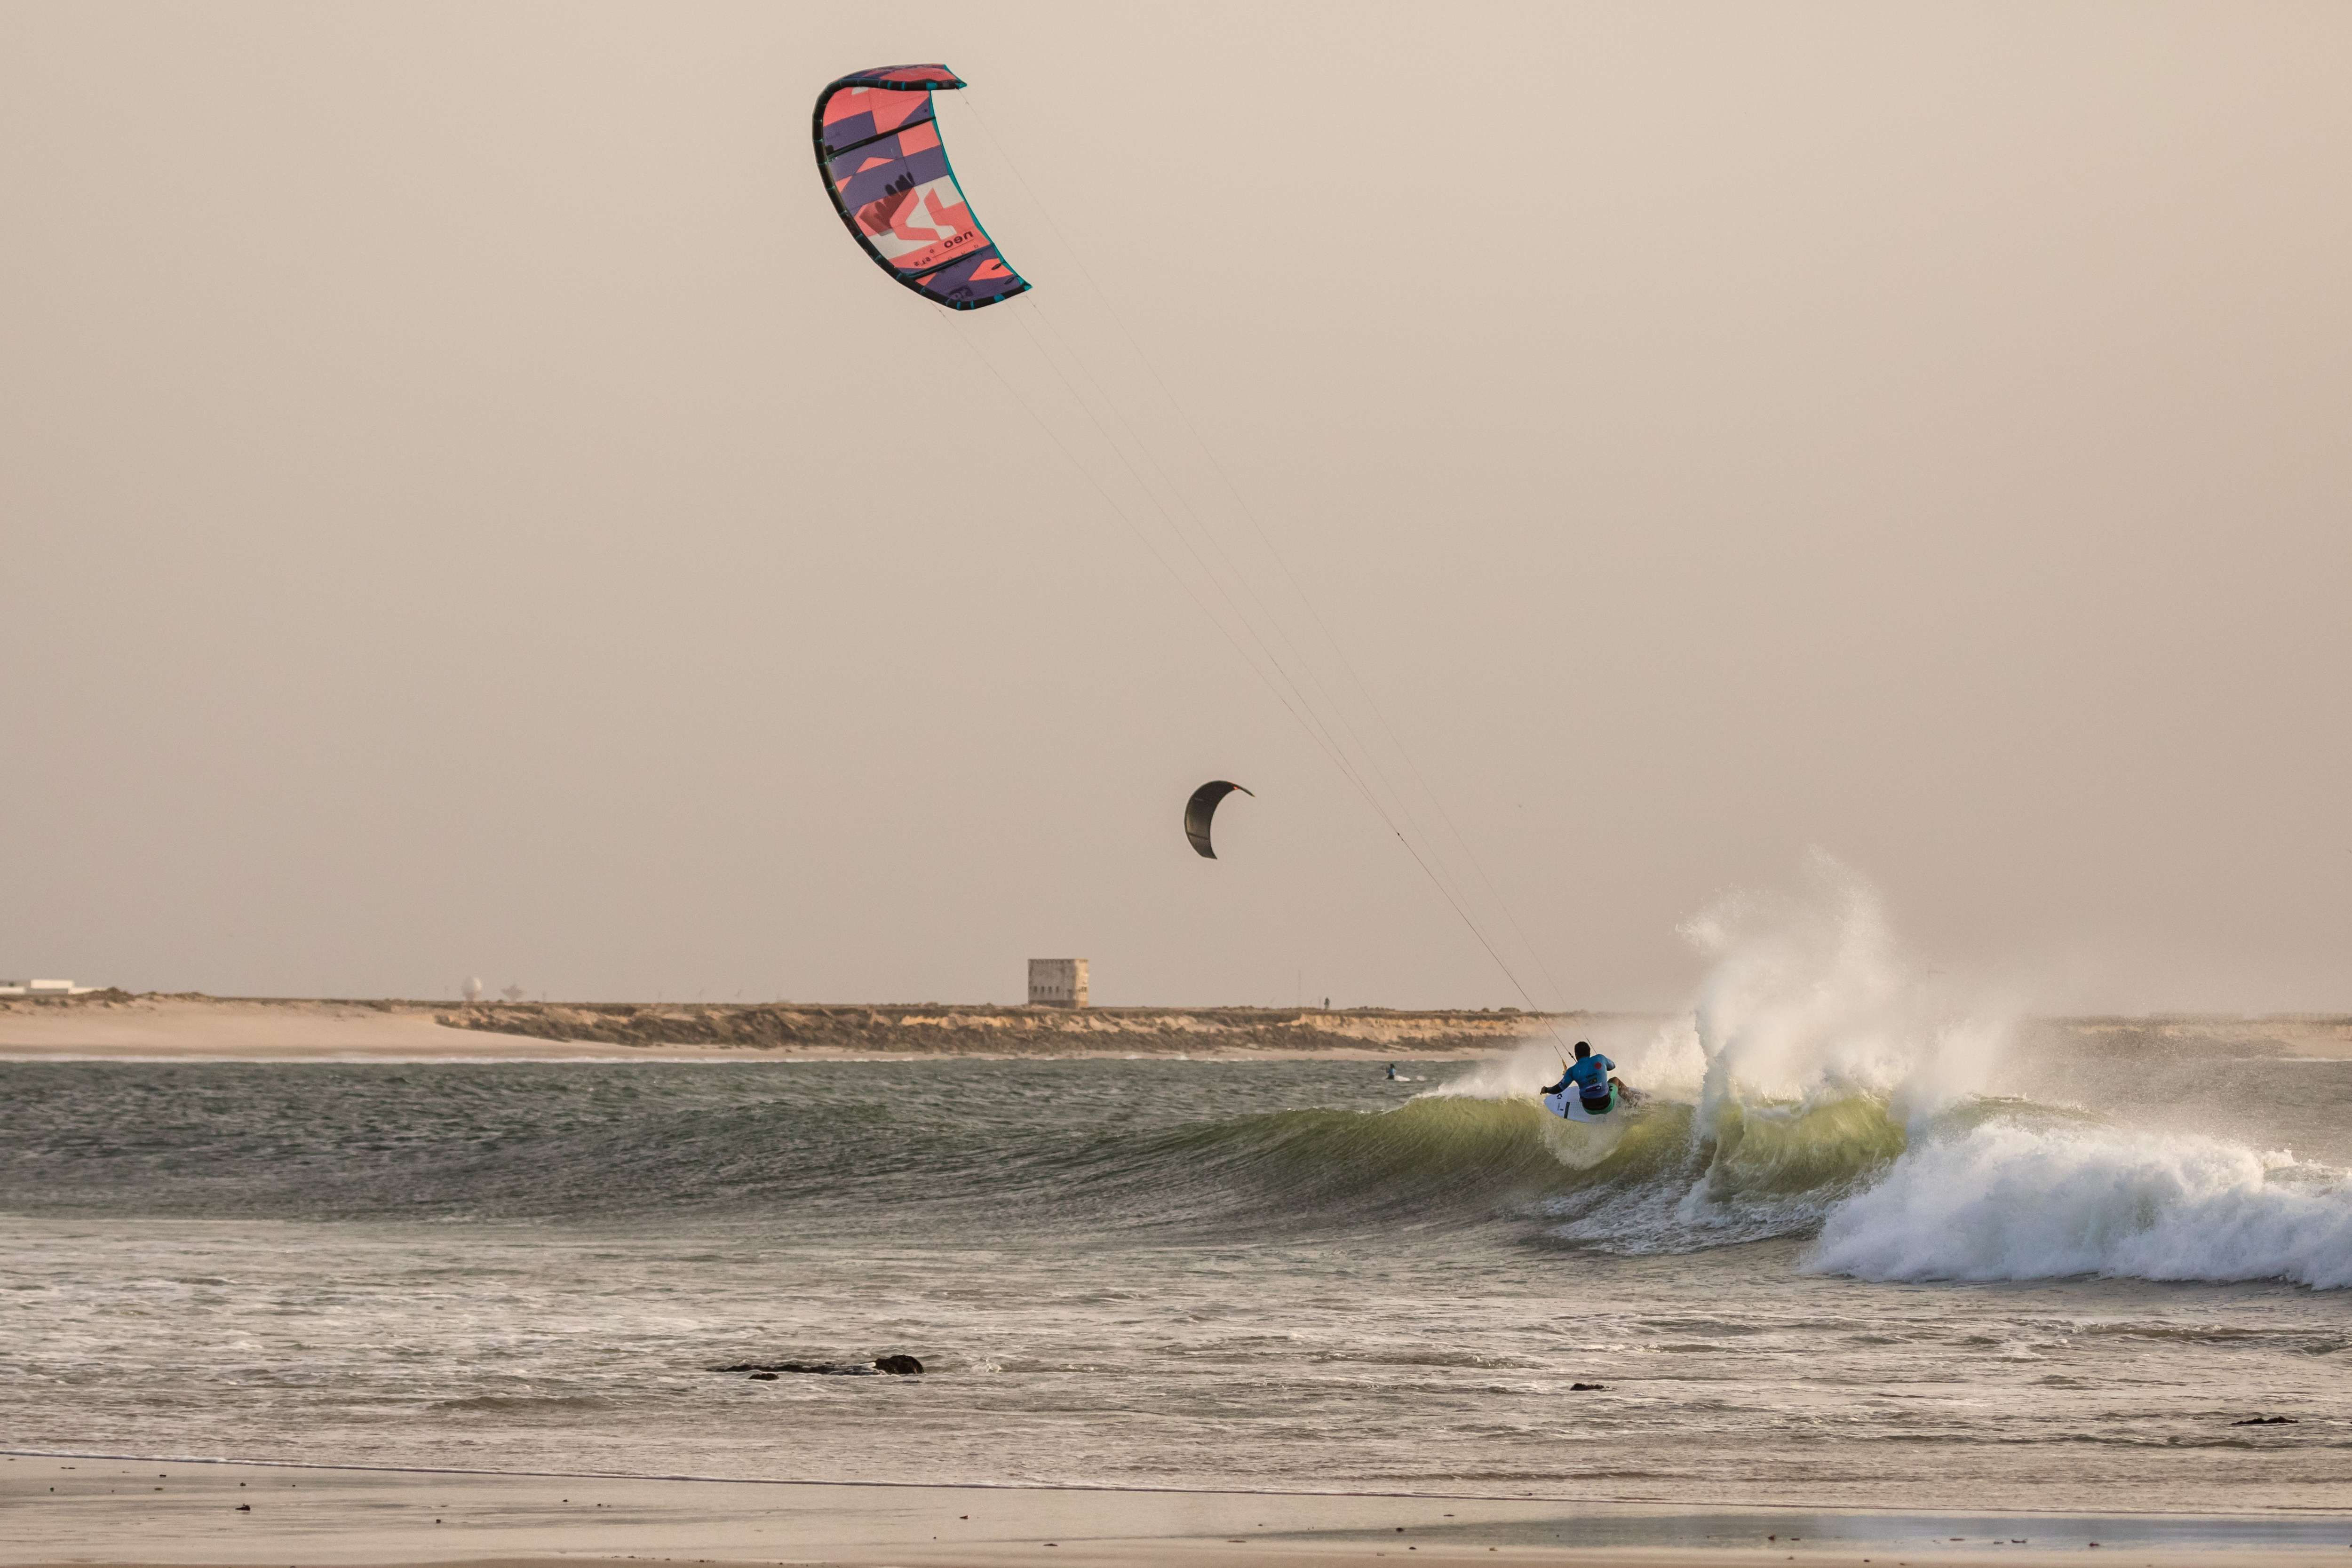 Who made it to the quarterfinals? - GKA Kite-Surf World Cup Dakhla Day 2